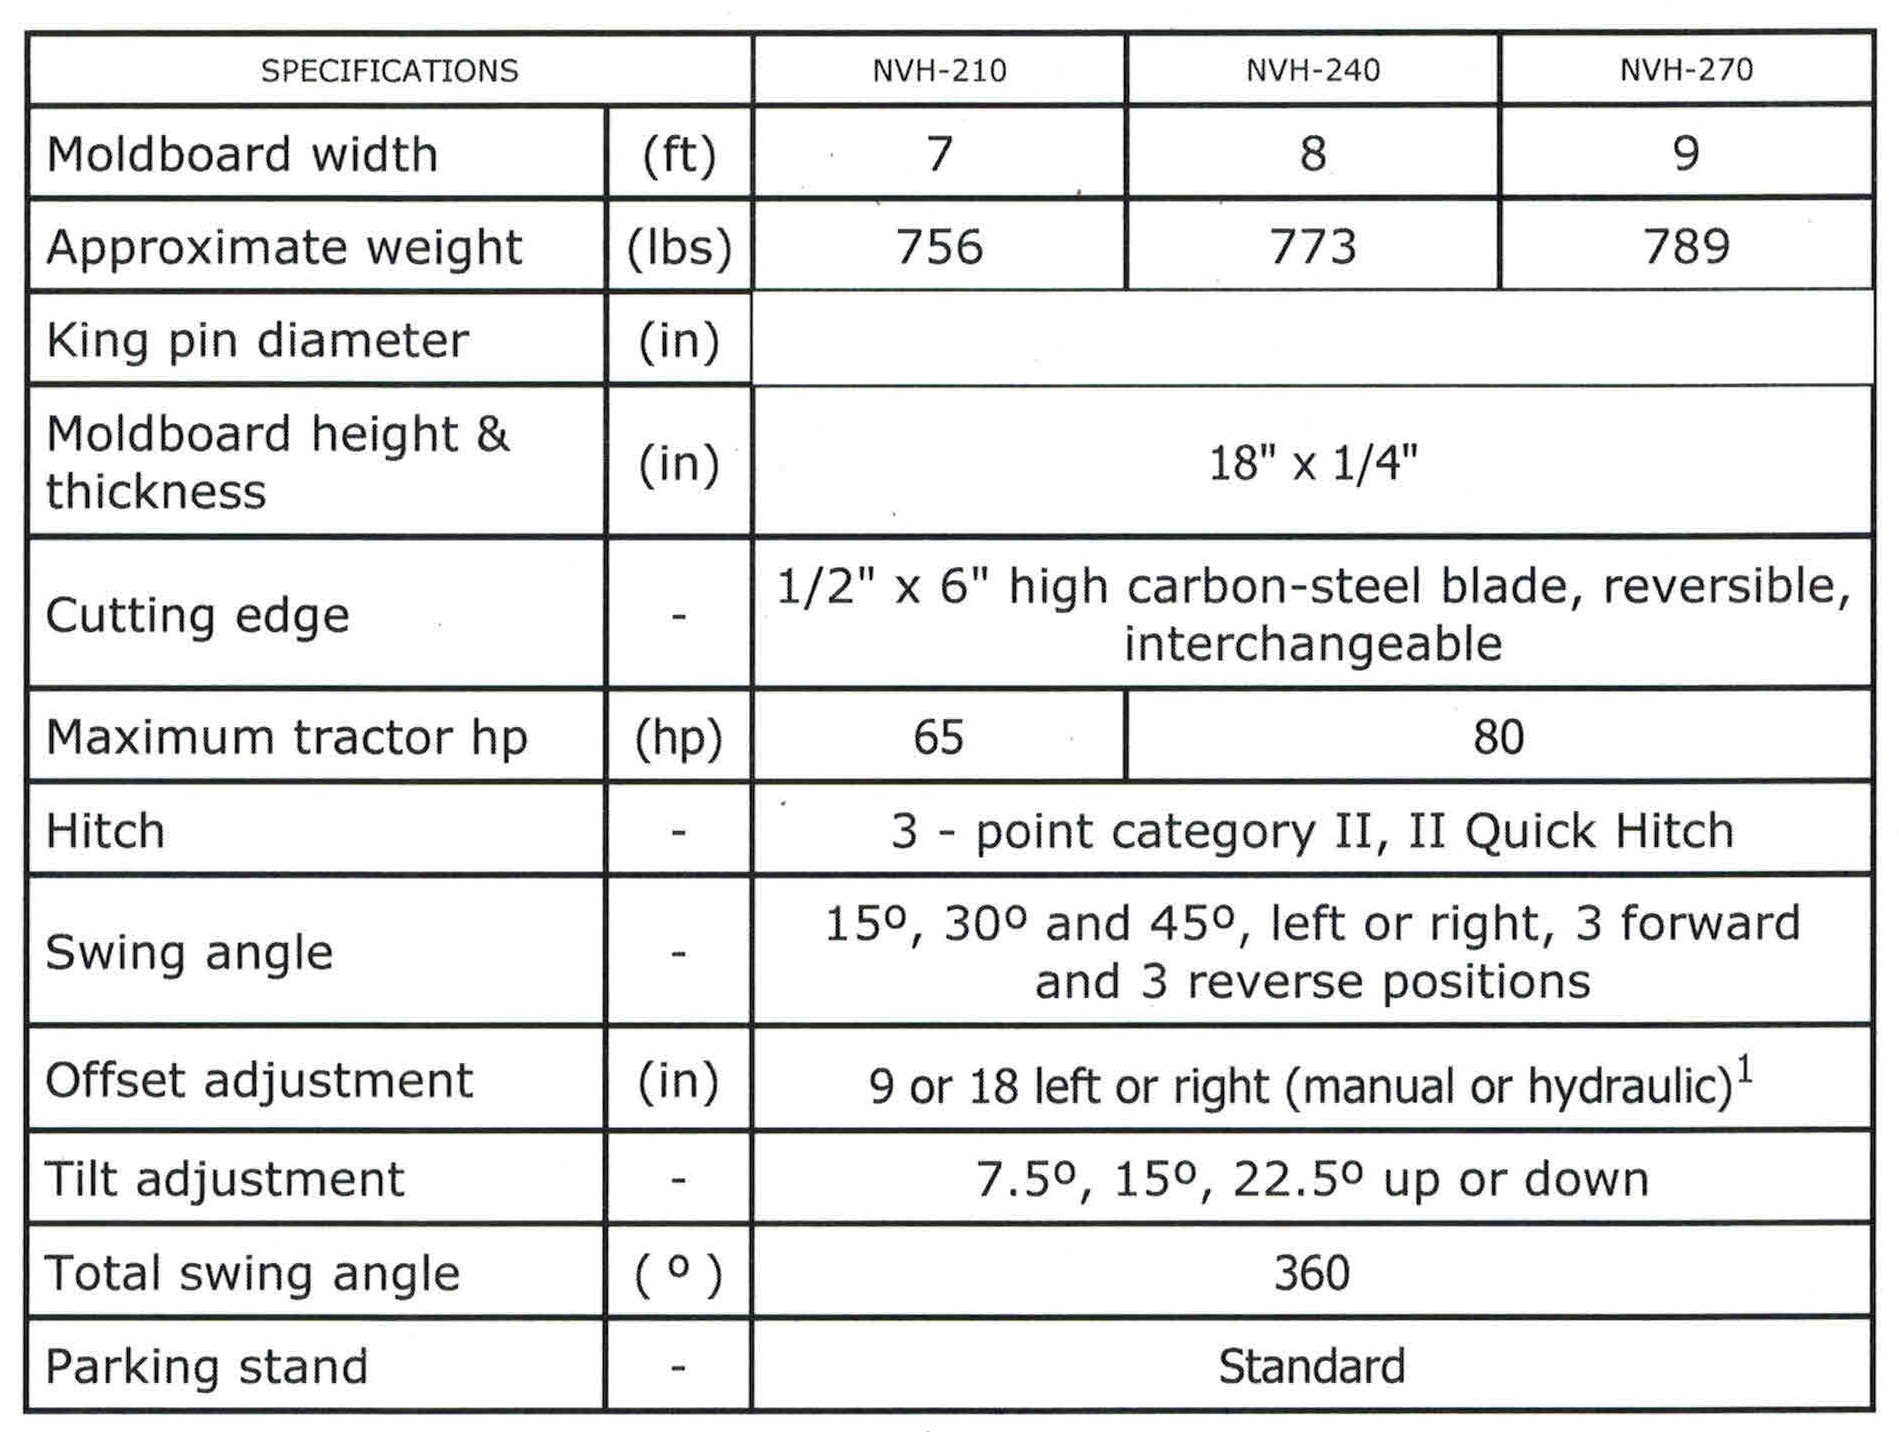 Specifications NVH Series Tractor Blades